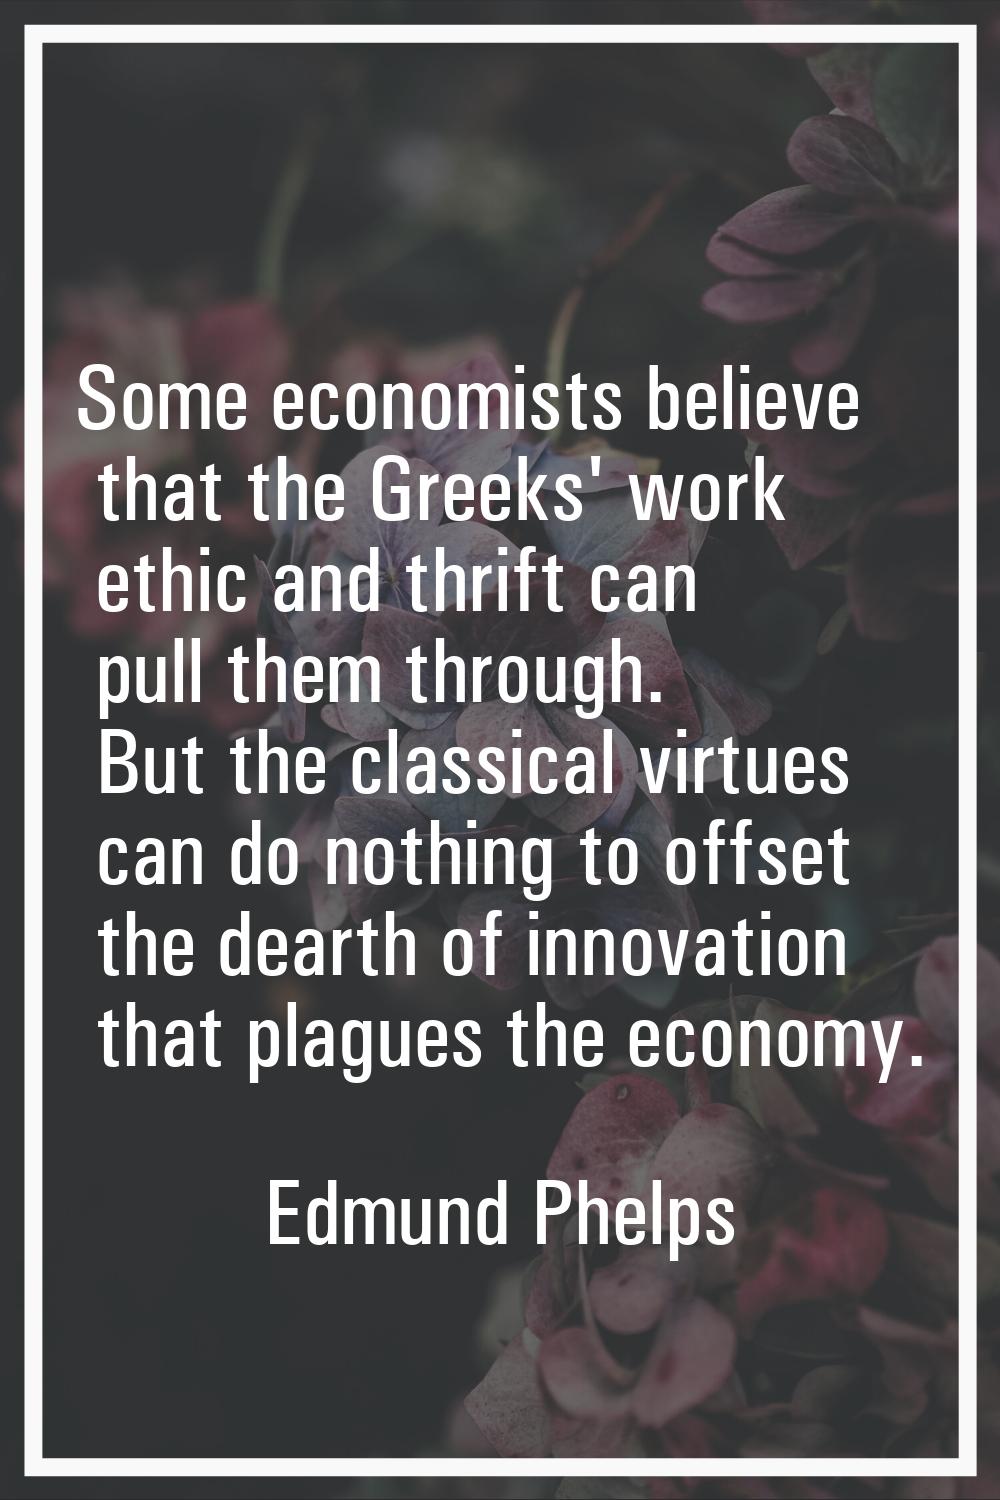 Some economists believe that the Greeks' work ethic and thrift can pull them through. But the class